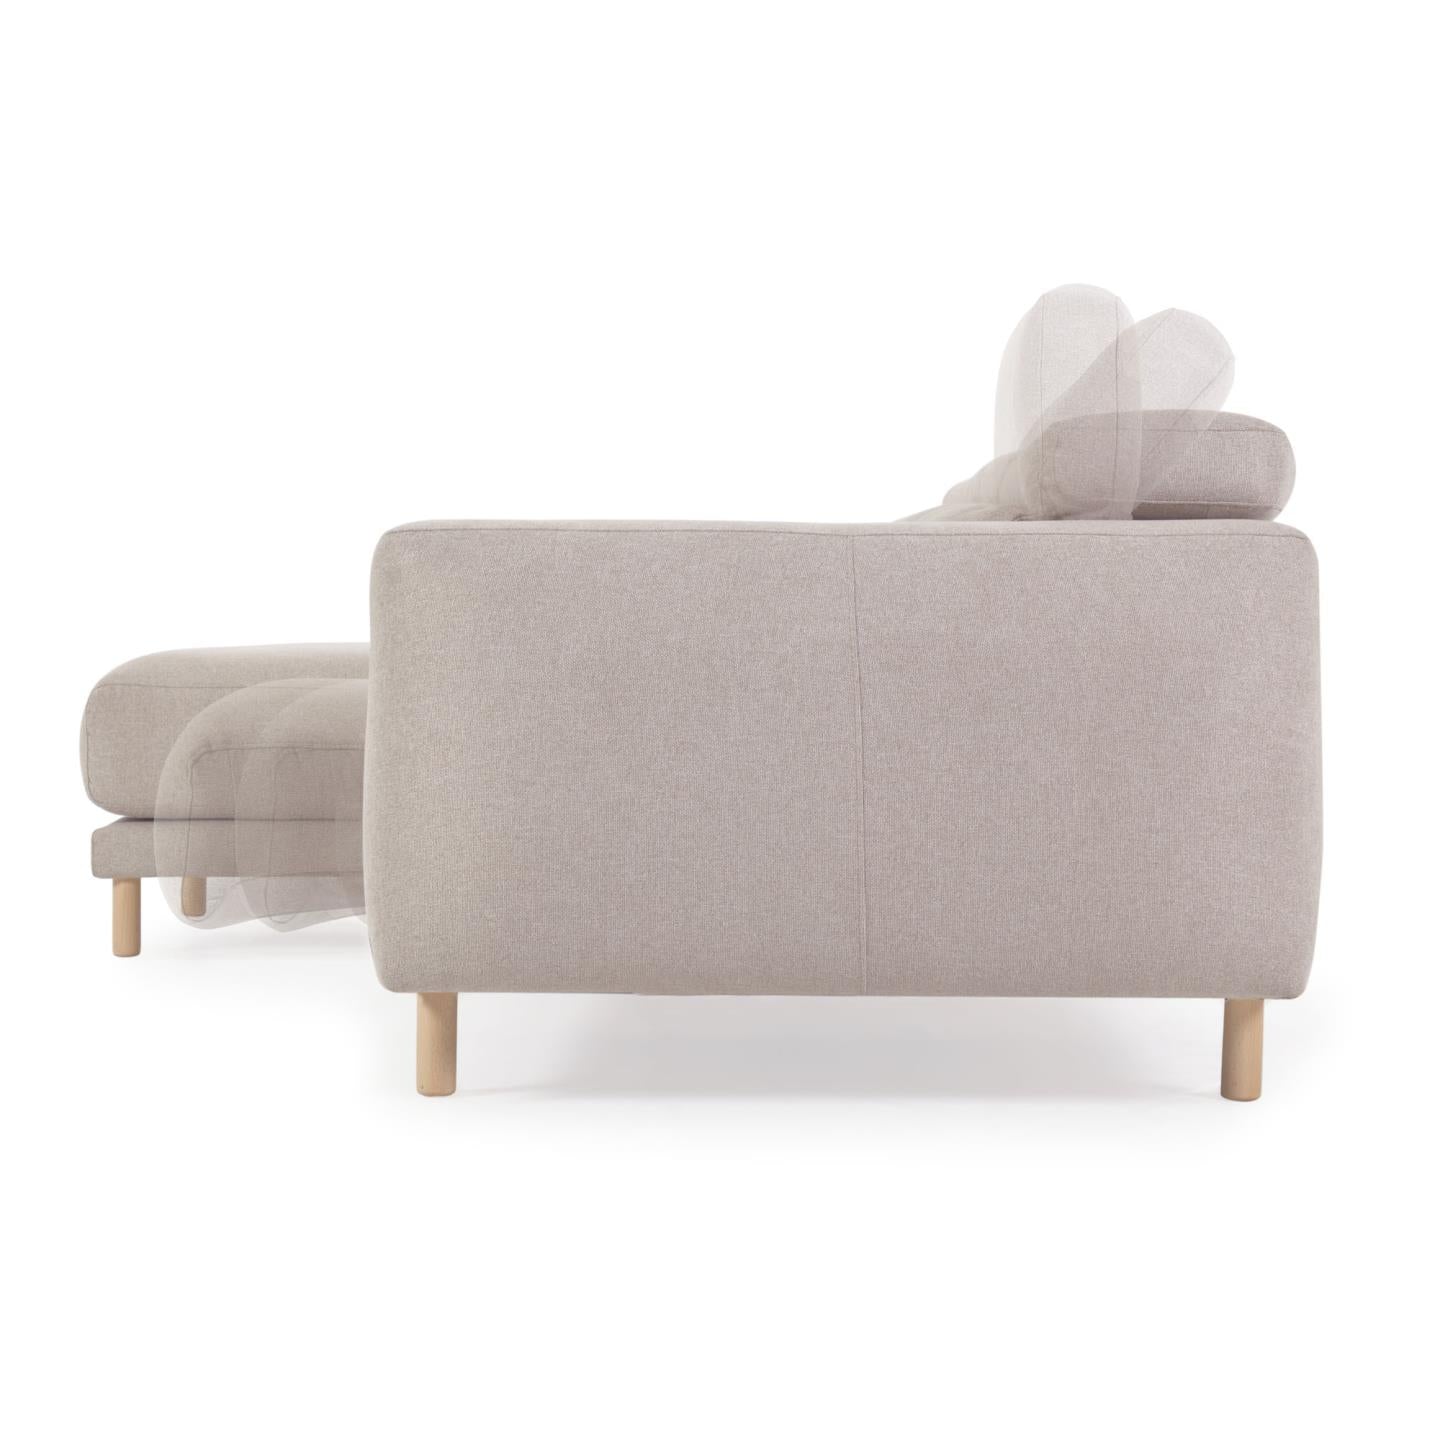 Singa 3 seater sofa with left-hand chaise longue in beige, 296 cm